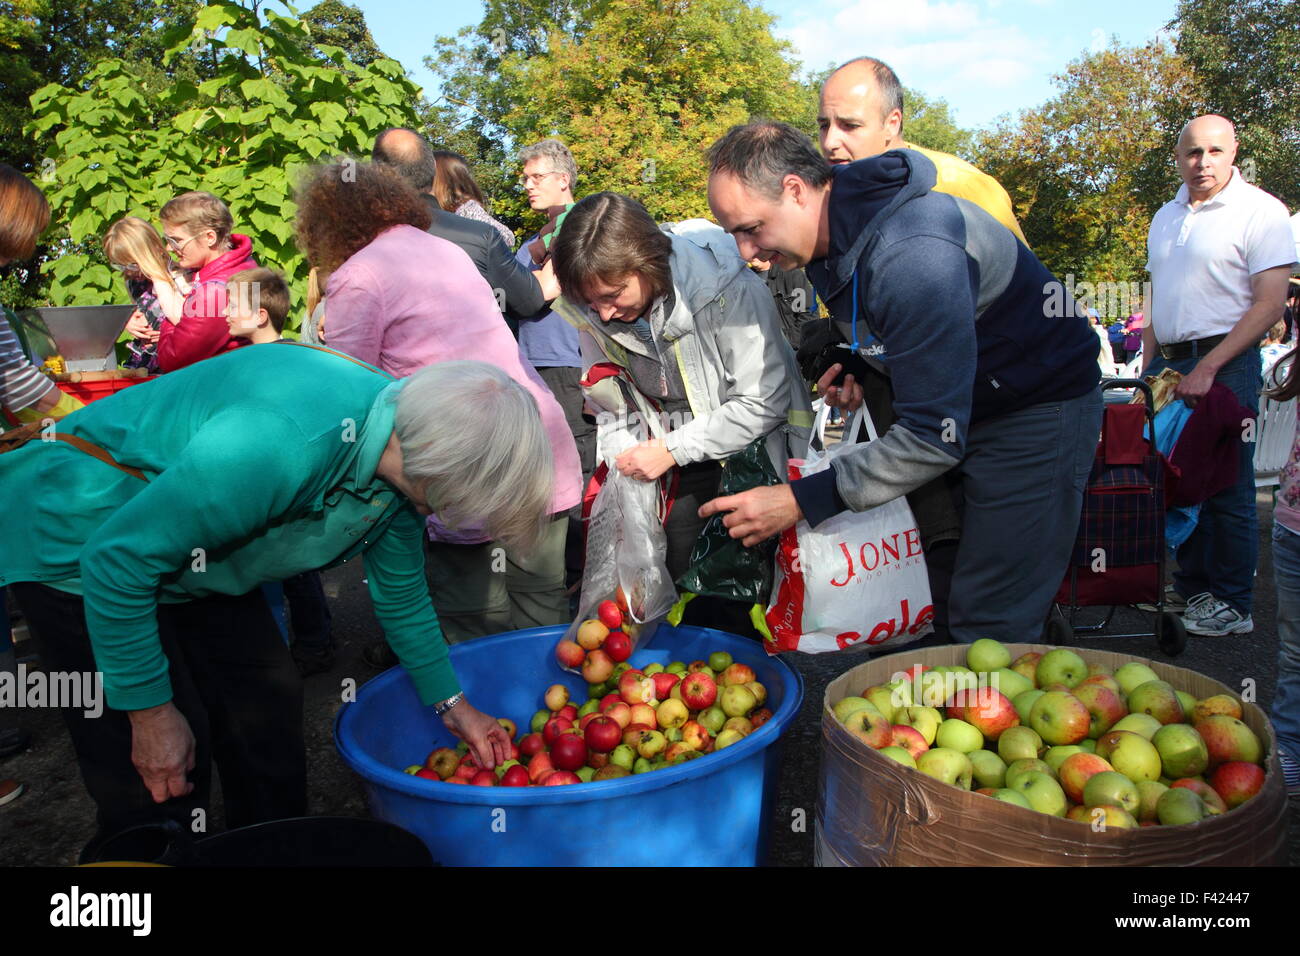 People bring apples for pressing into juice at a community Apple Day event in Sheffield, South Yorkshire England Stock Photo